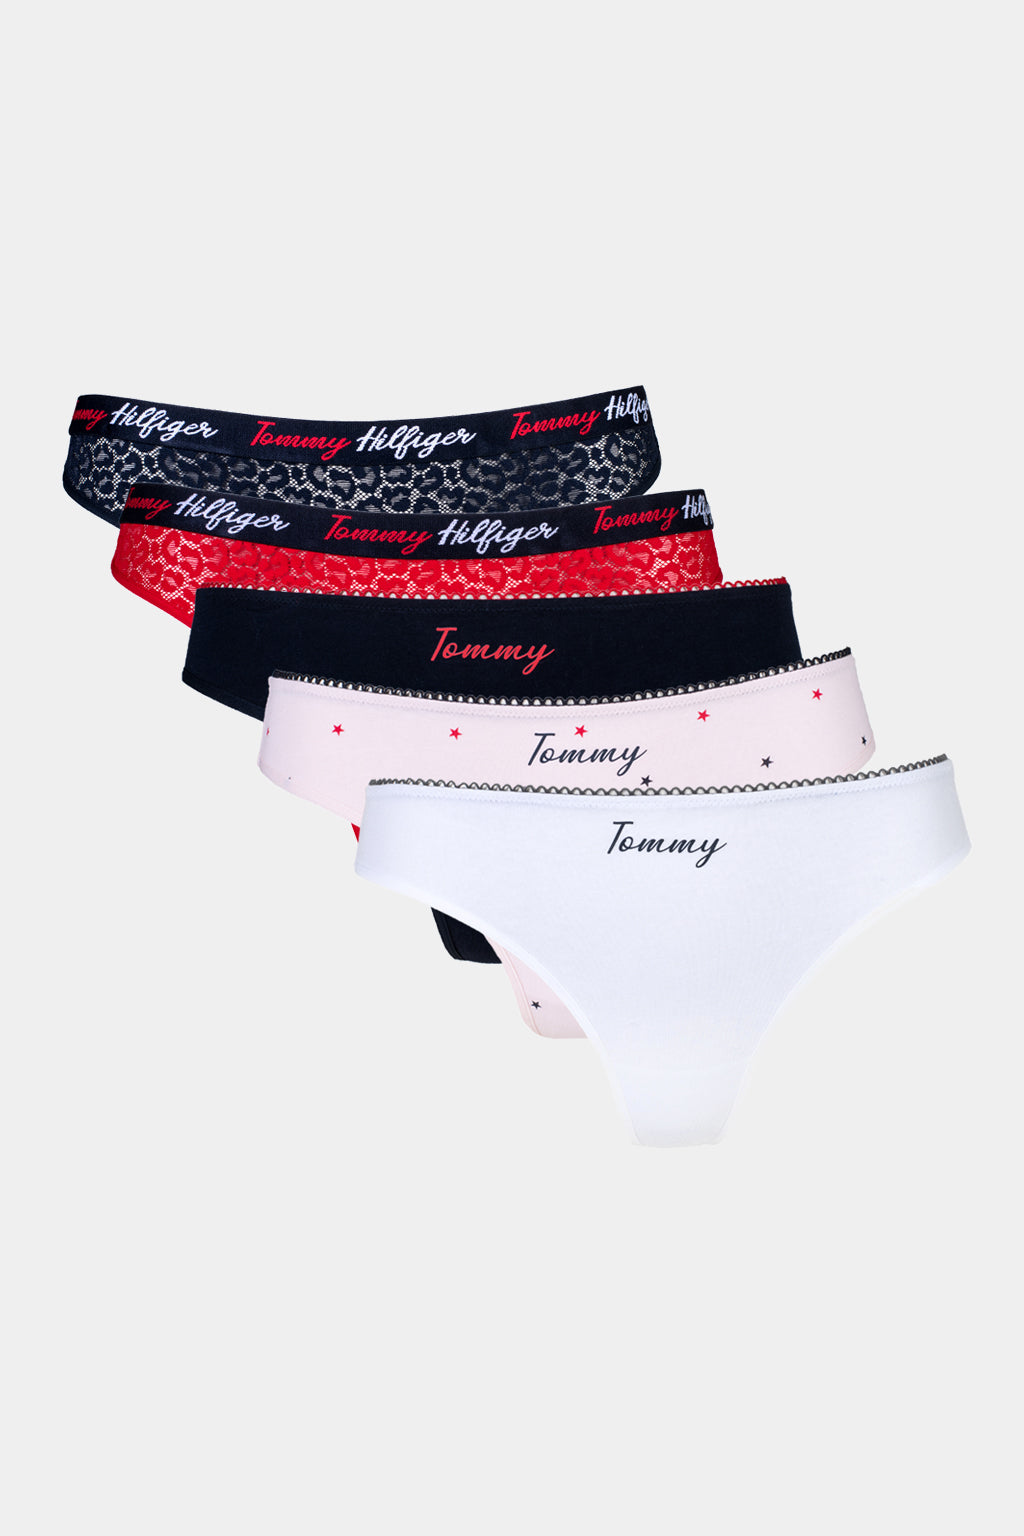 Tommy Hilfiger - Thongs 5-Pack Holiday Gift Box